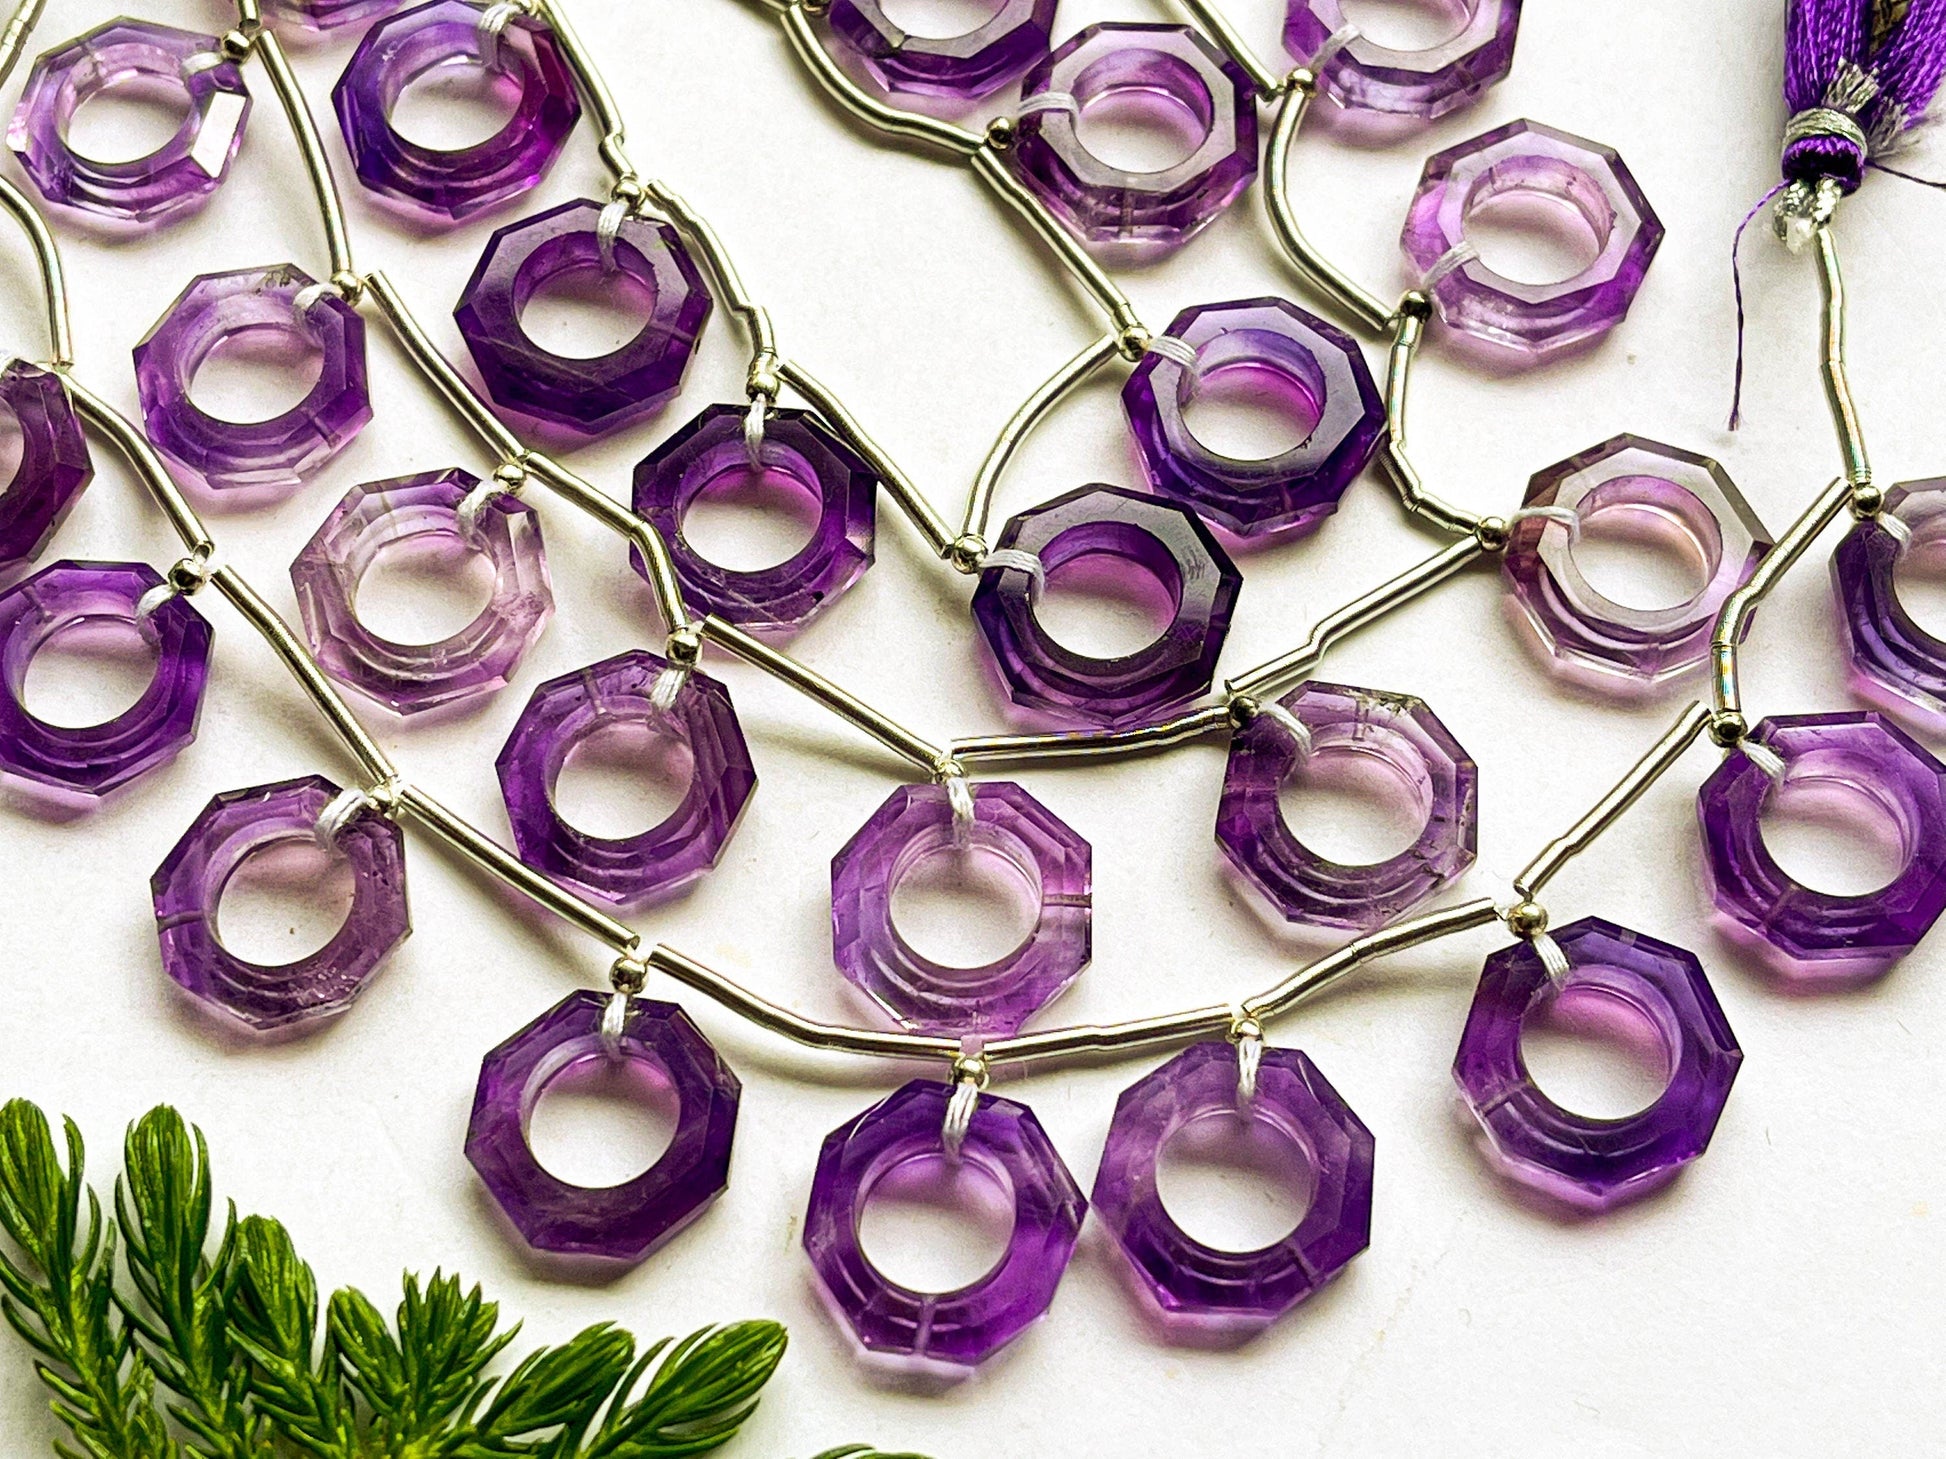 10 Pieces AMETHYST Octagon Shape Faceted Hoop Beads, Natural Amethyst Gemstone Beads, Amethyst Hoop Beads, Rare Gemstone Beads Beadsforyourjewelry